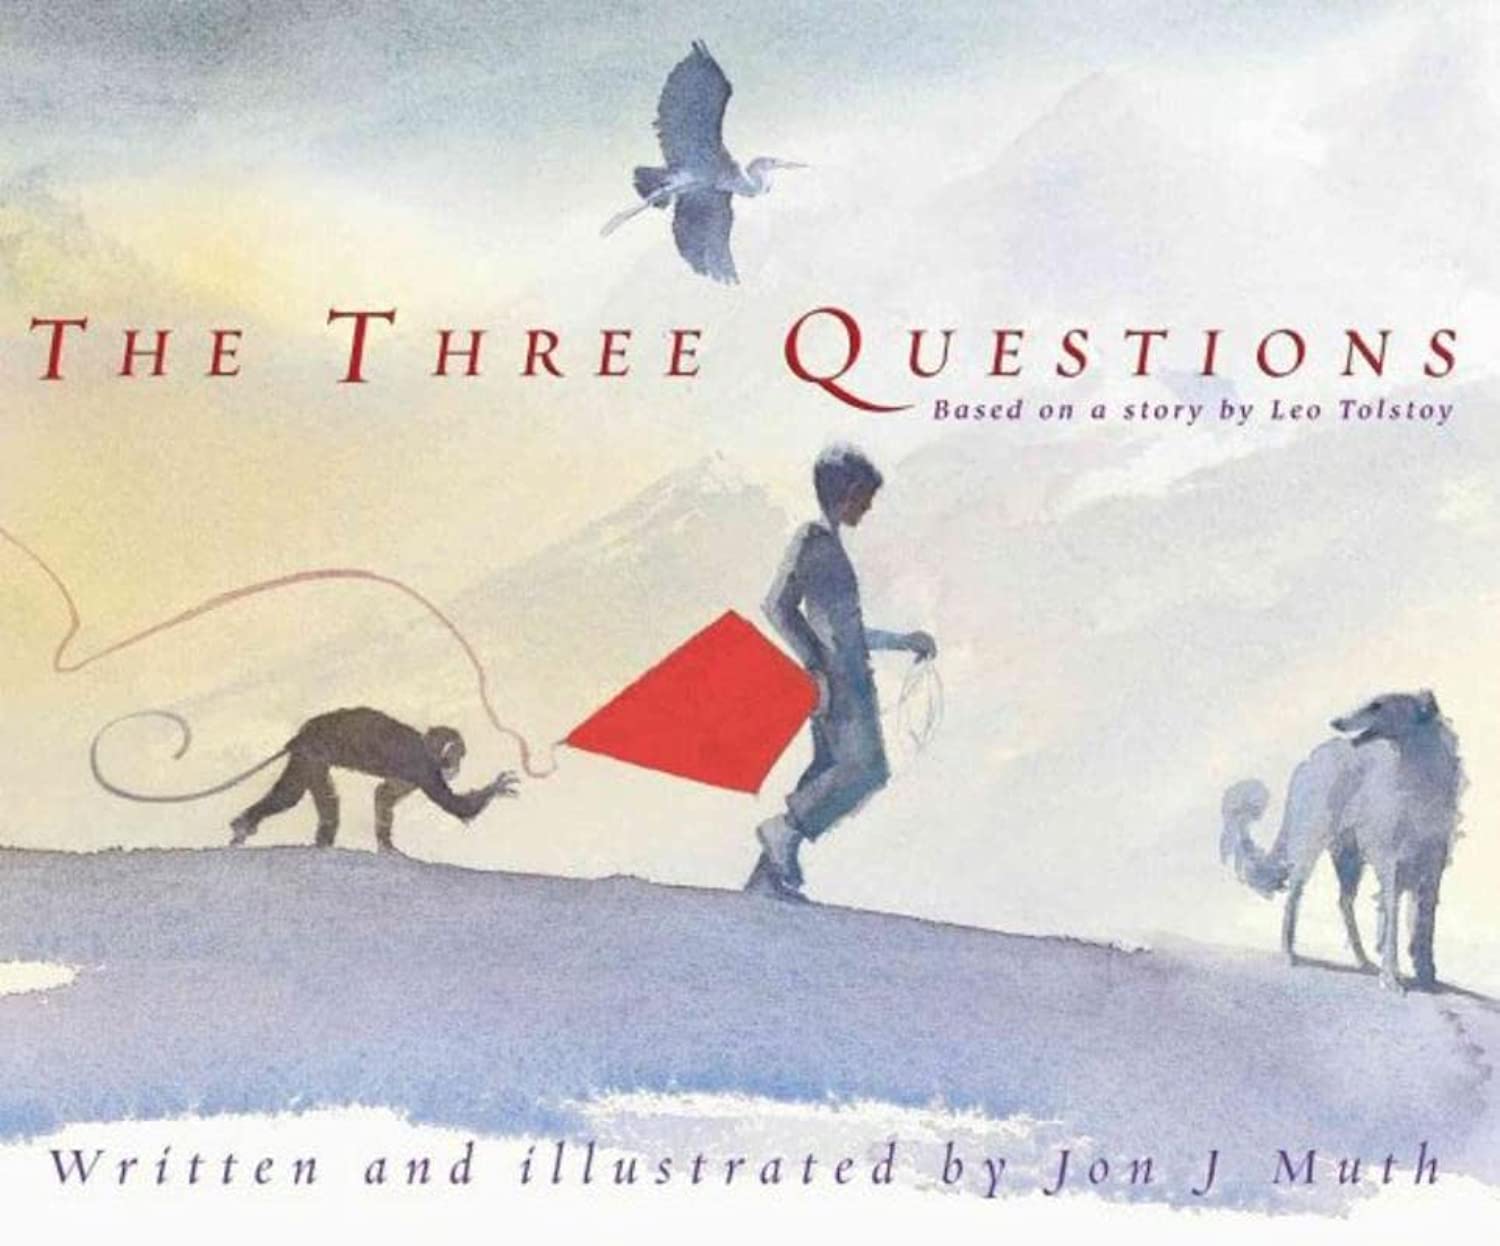 The Three Questions (Based on a story by Leo Tolstoy)